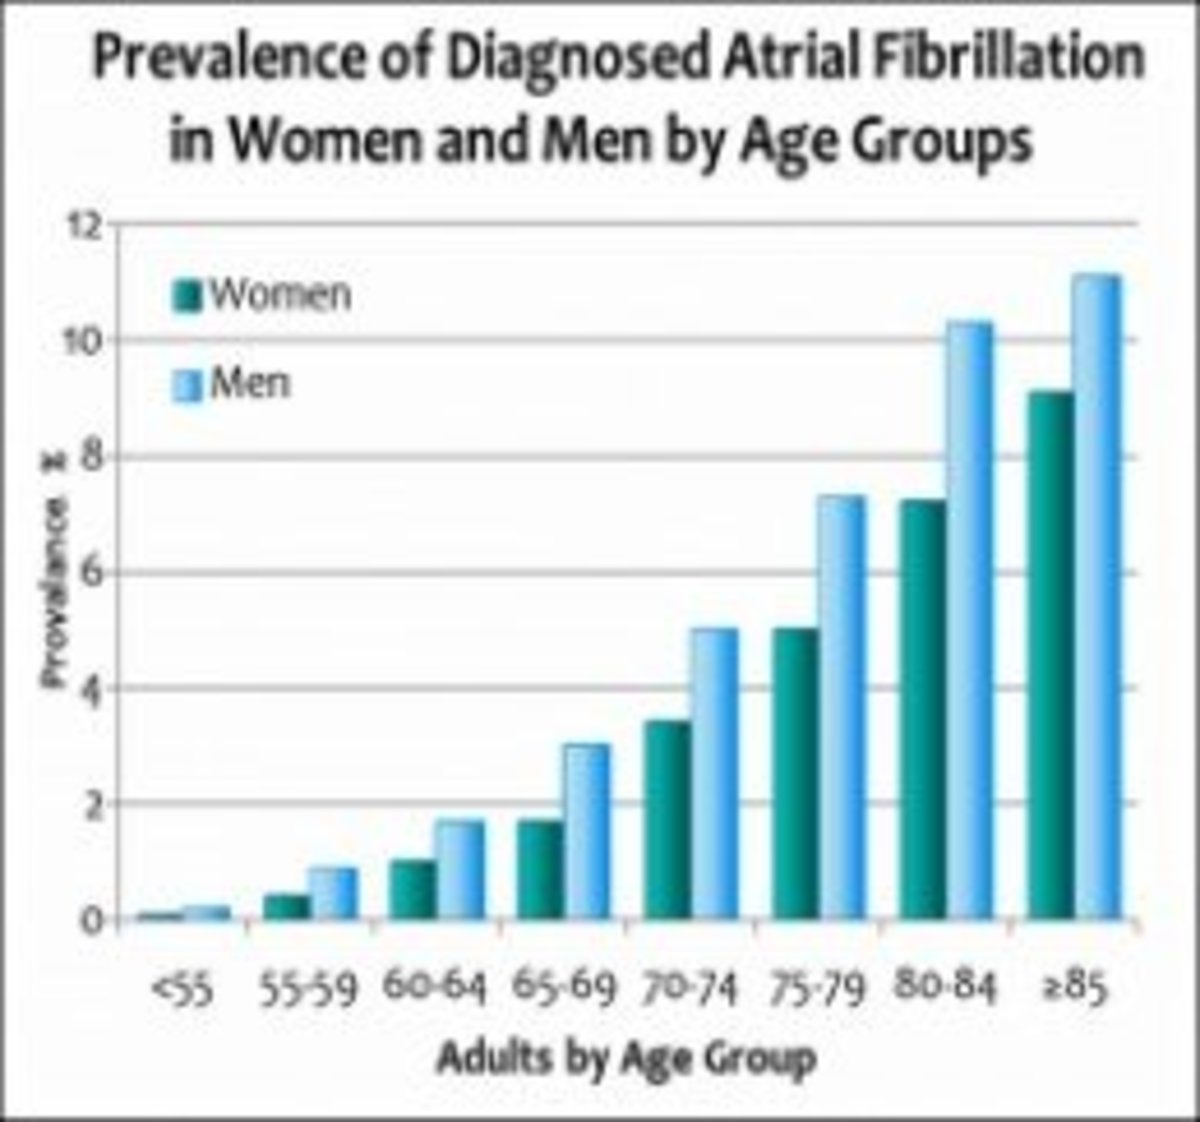 Prevalence of A-Fib in Men and Women by Age Group